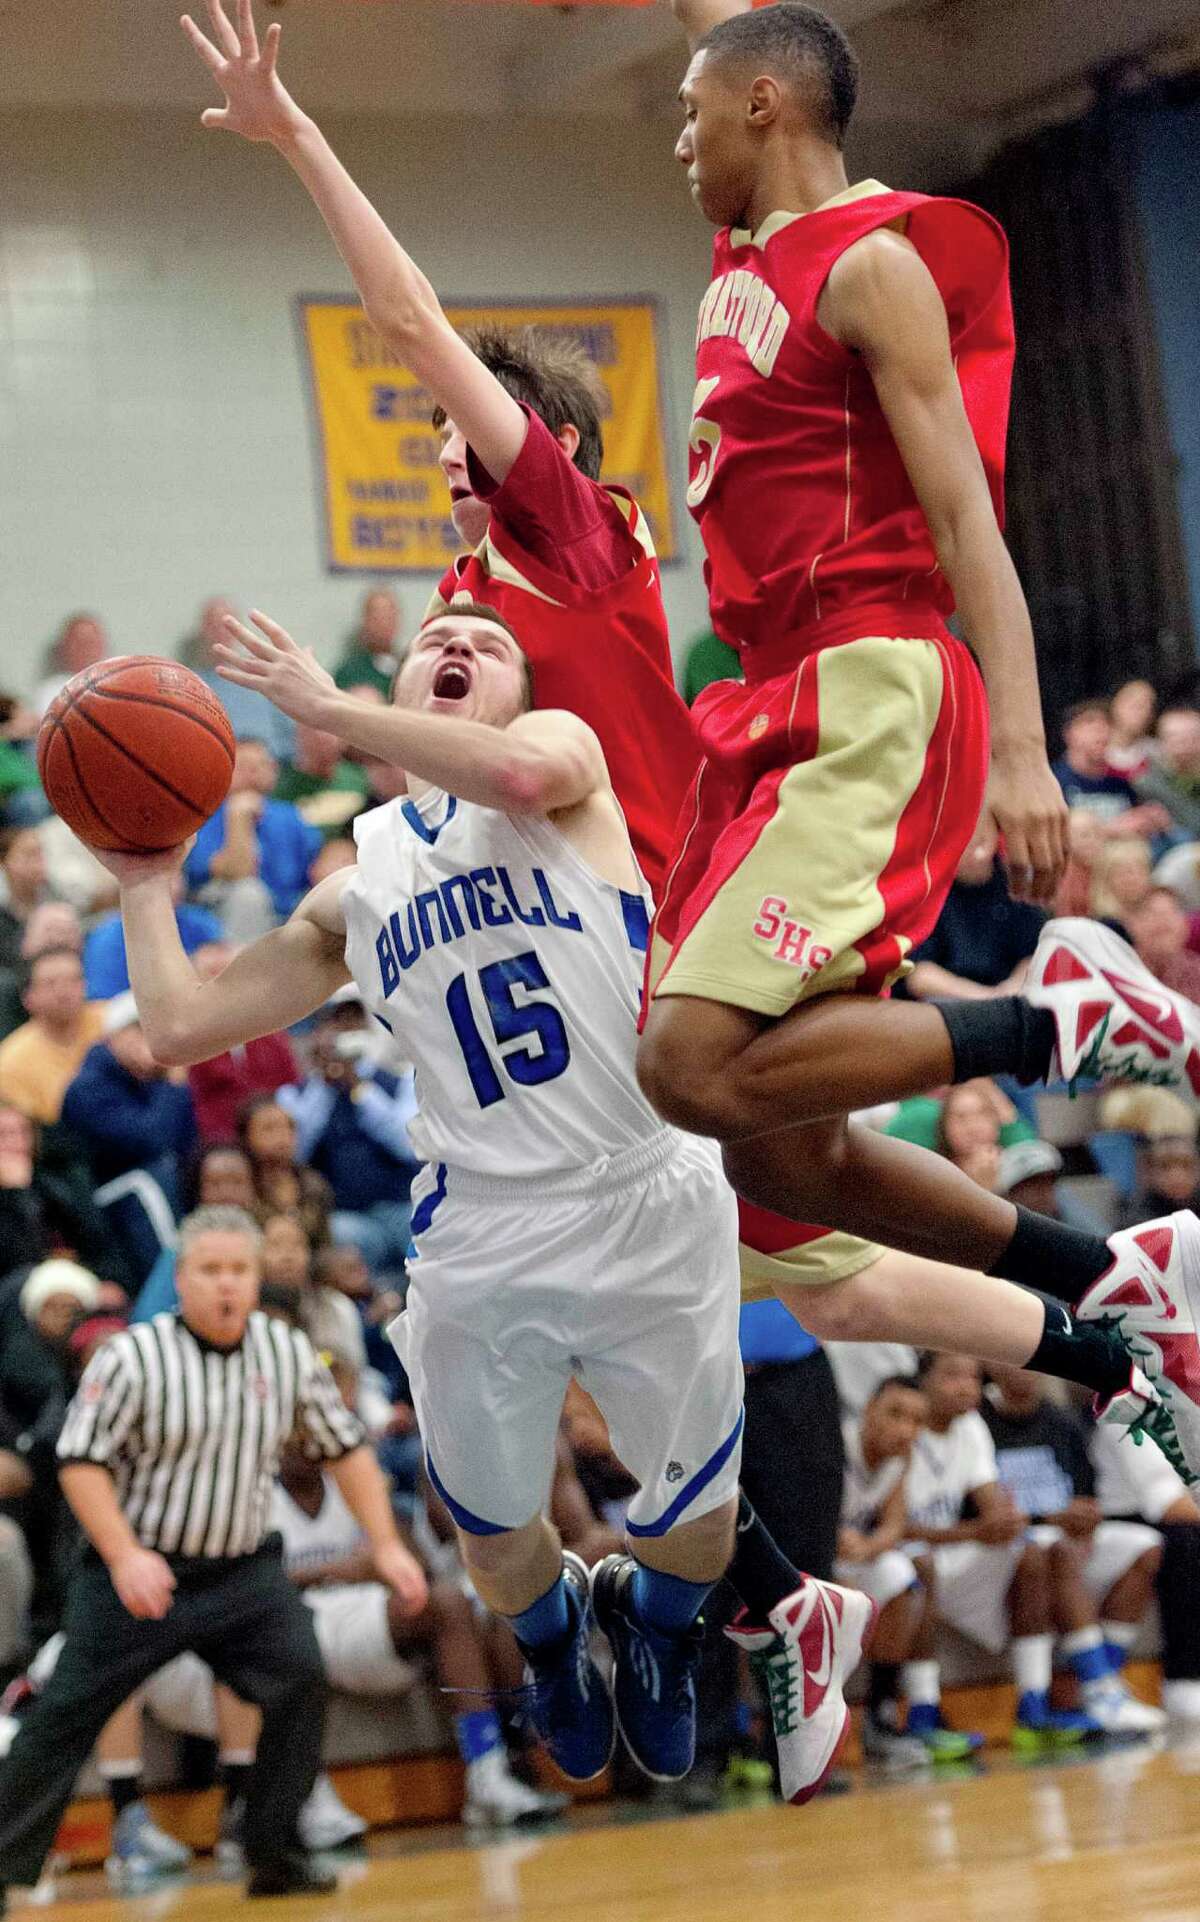 Stratford high school's Emmanuel Young and Arron Smith try to stop Bunnell high school's Timothy White from going up for a shot in a boys basketball game played at Bunnell high school, Stratford, CT on Saturday, December 22nd, 2012.